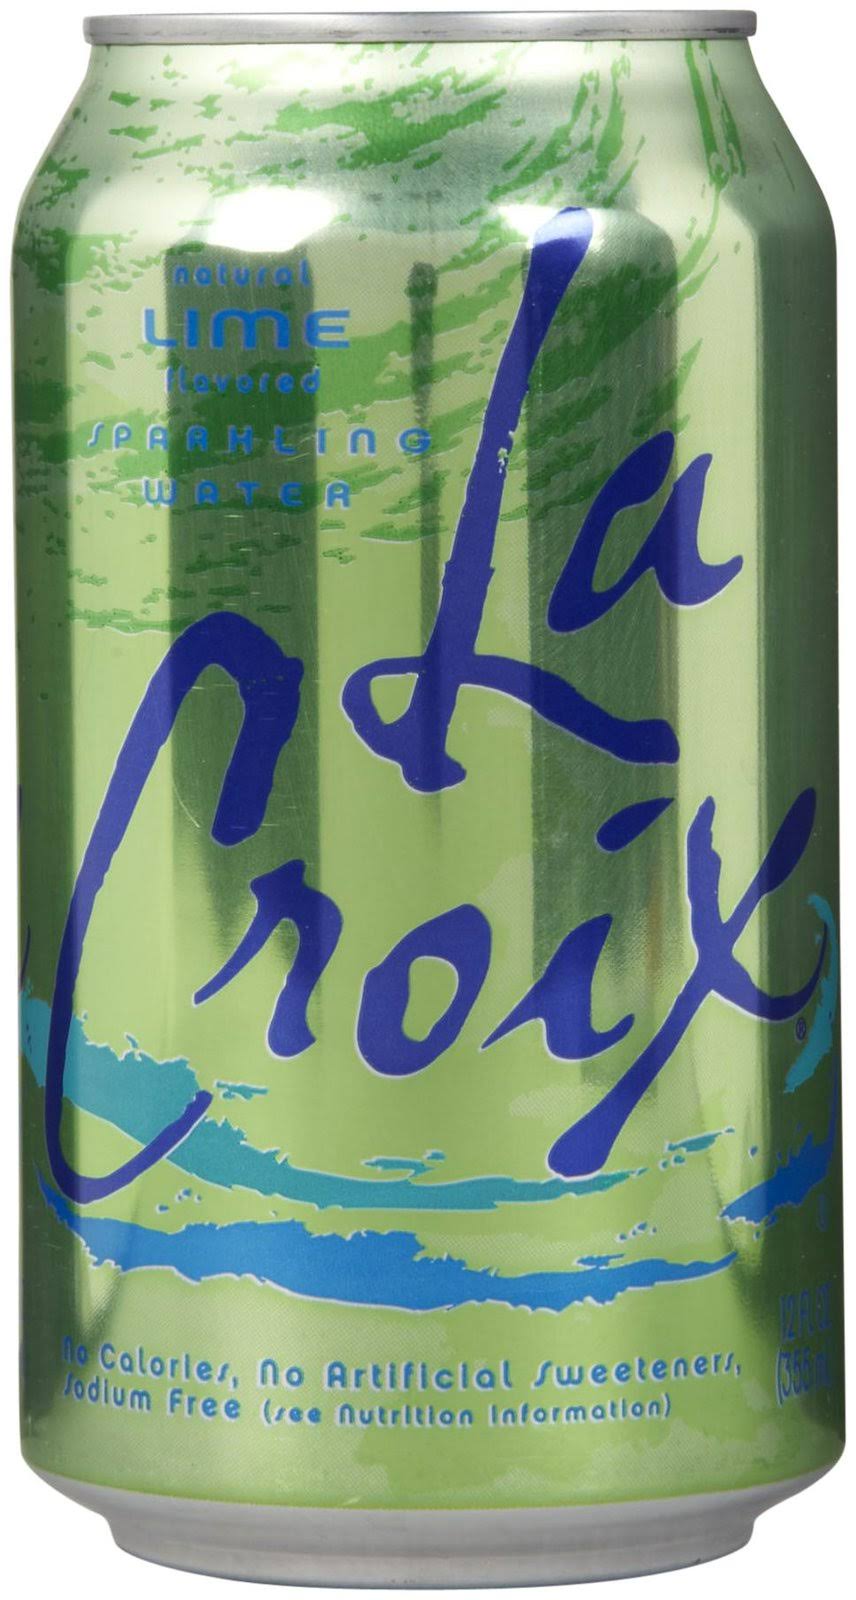 Lacroix Lime Sparkling Water